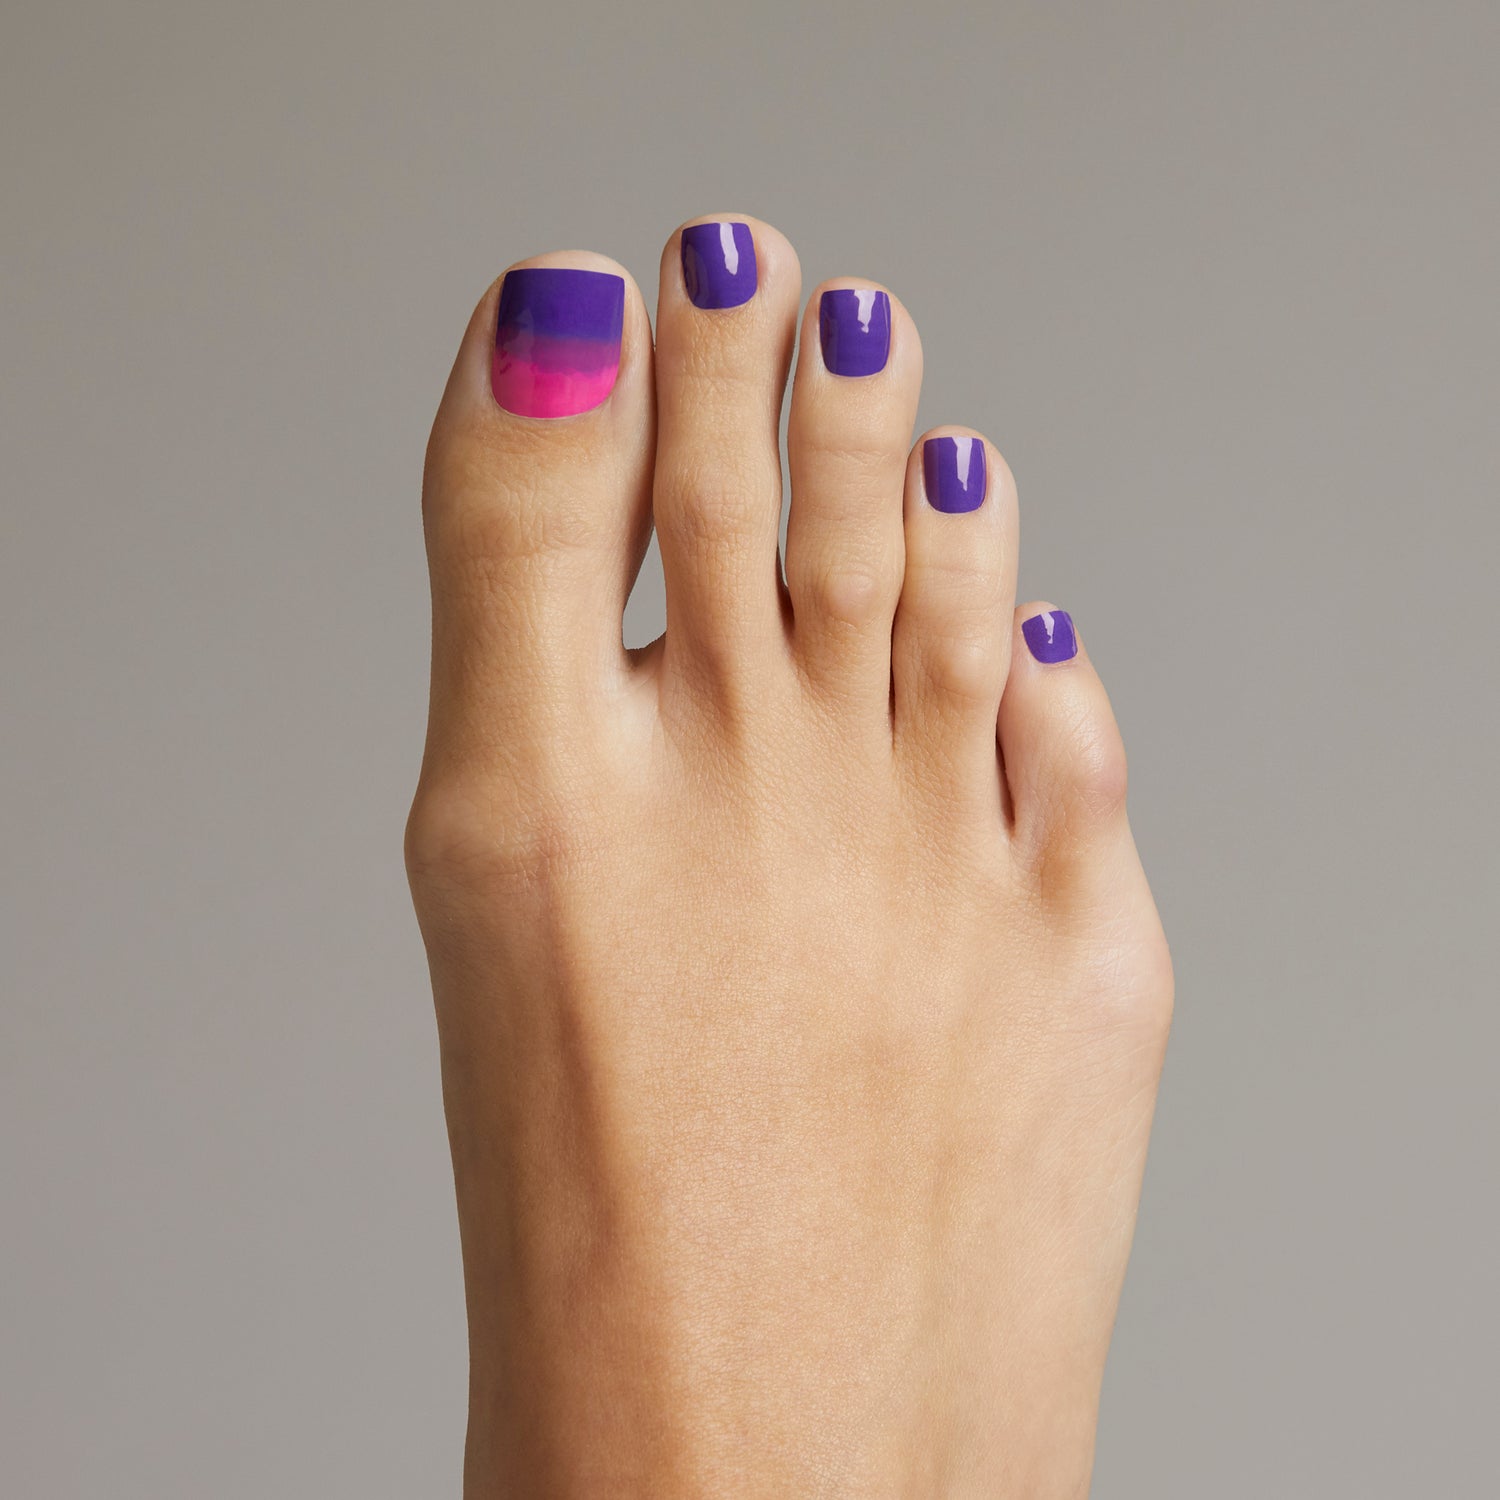 Hot pink & purple ombré gel pedicure strips with a double gel formula for an ultra-smooth finish.